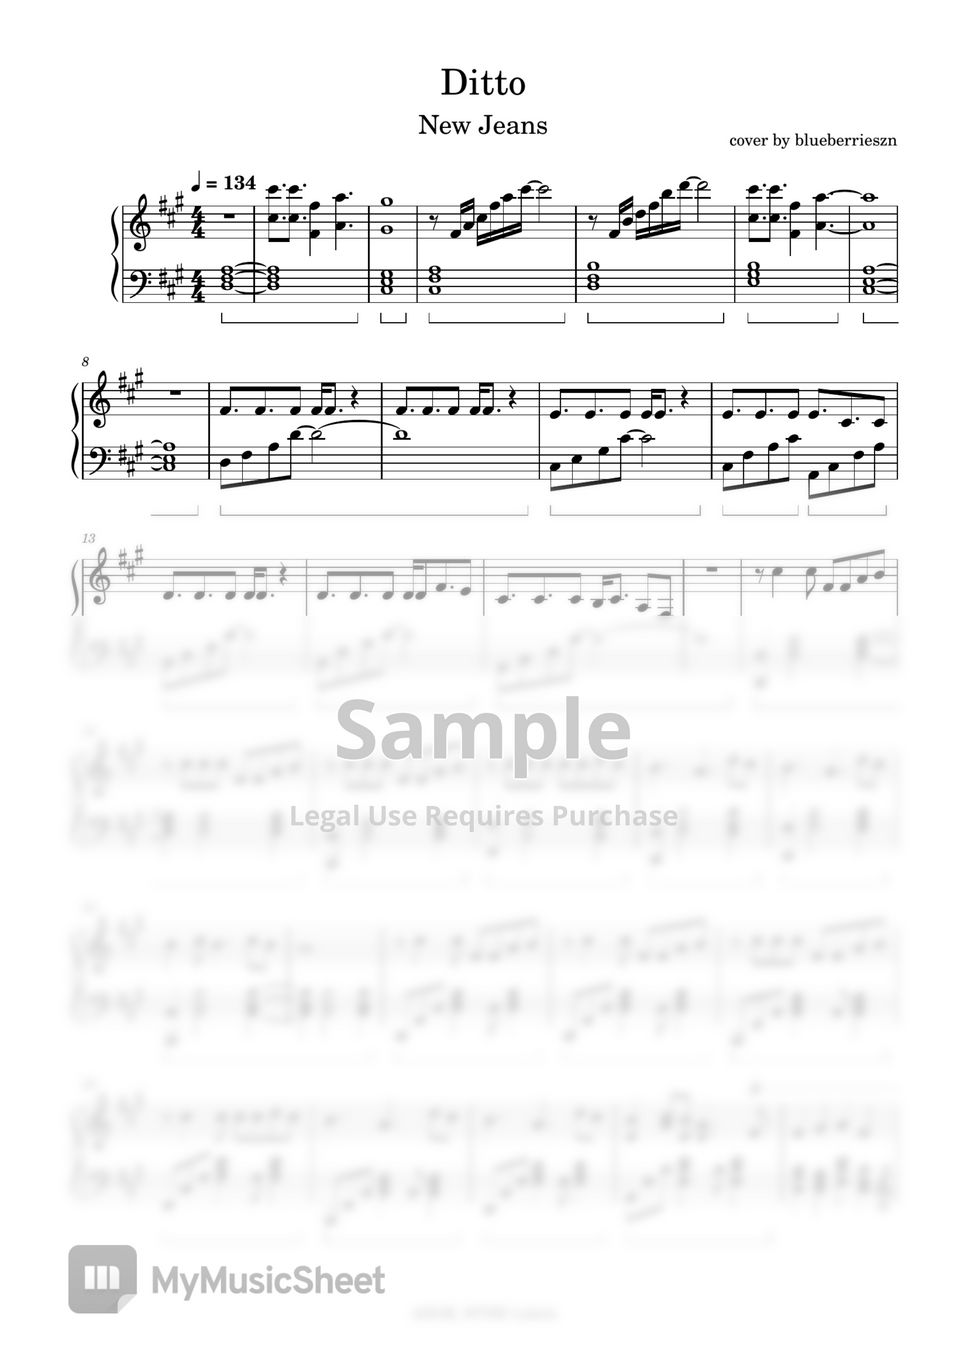 Ditto - NewJeans Sheet music for Piano (Solo)